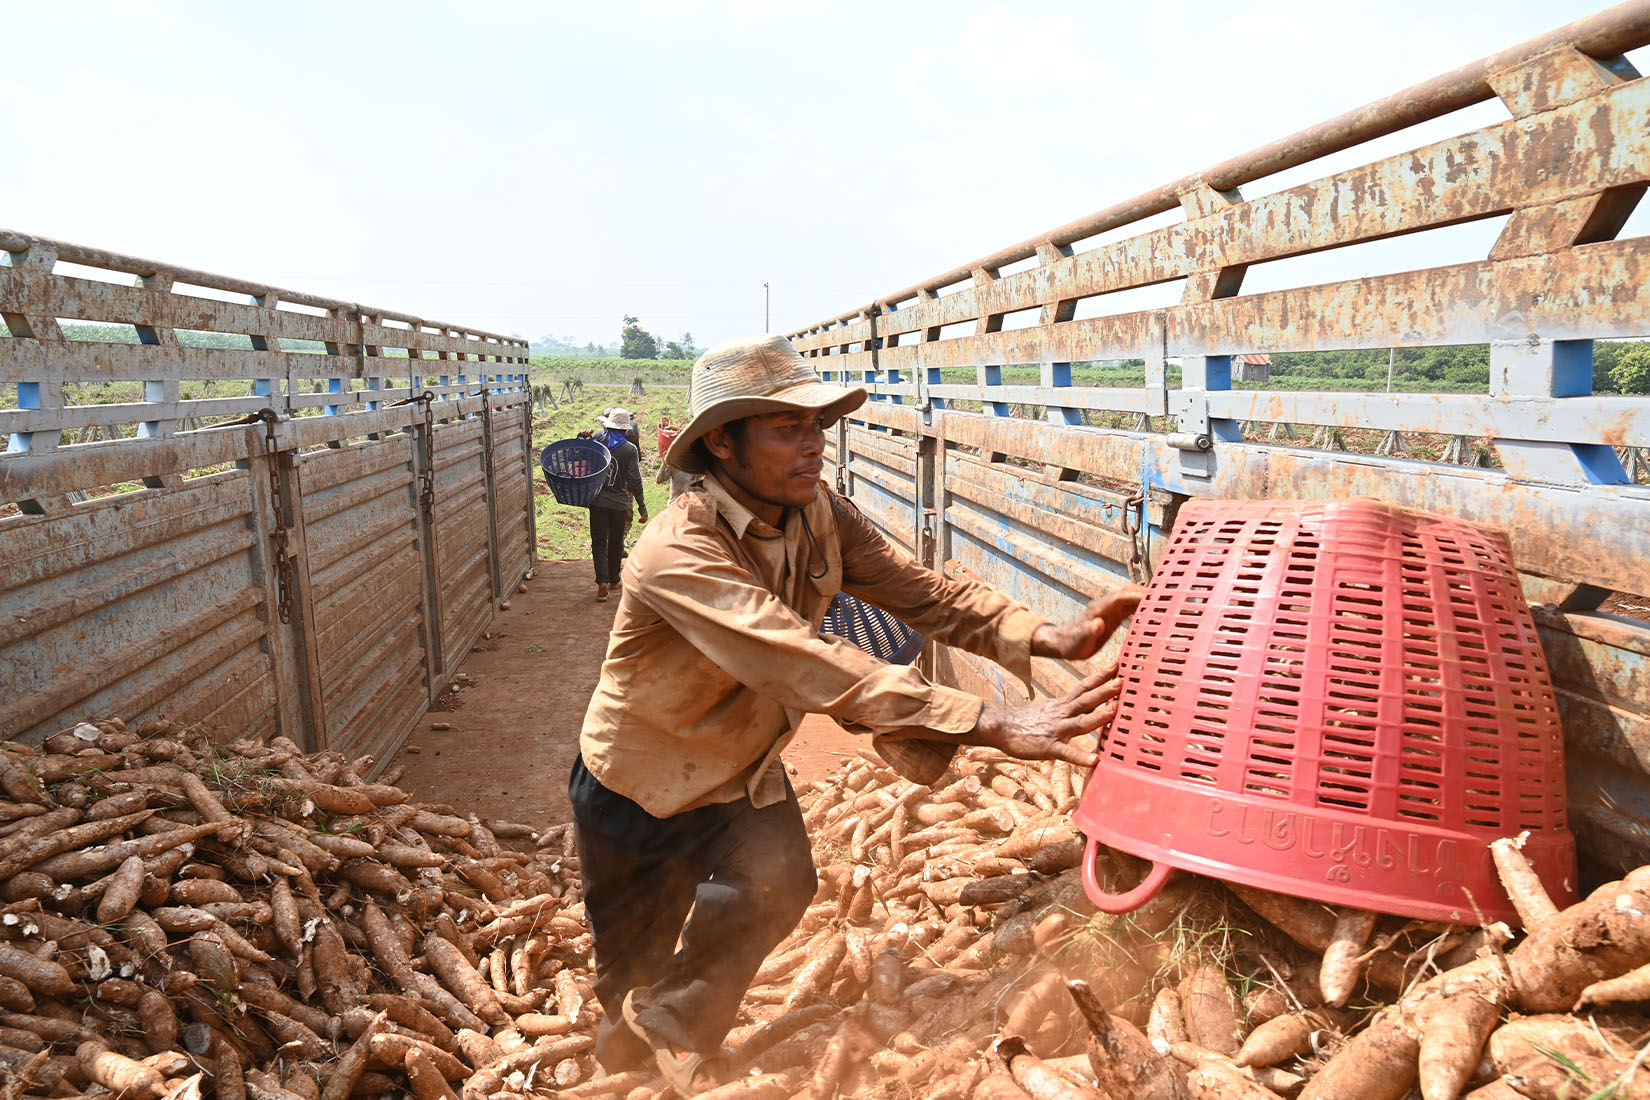 A man emptying a red tub of cassava into a truck filled with cassava.